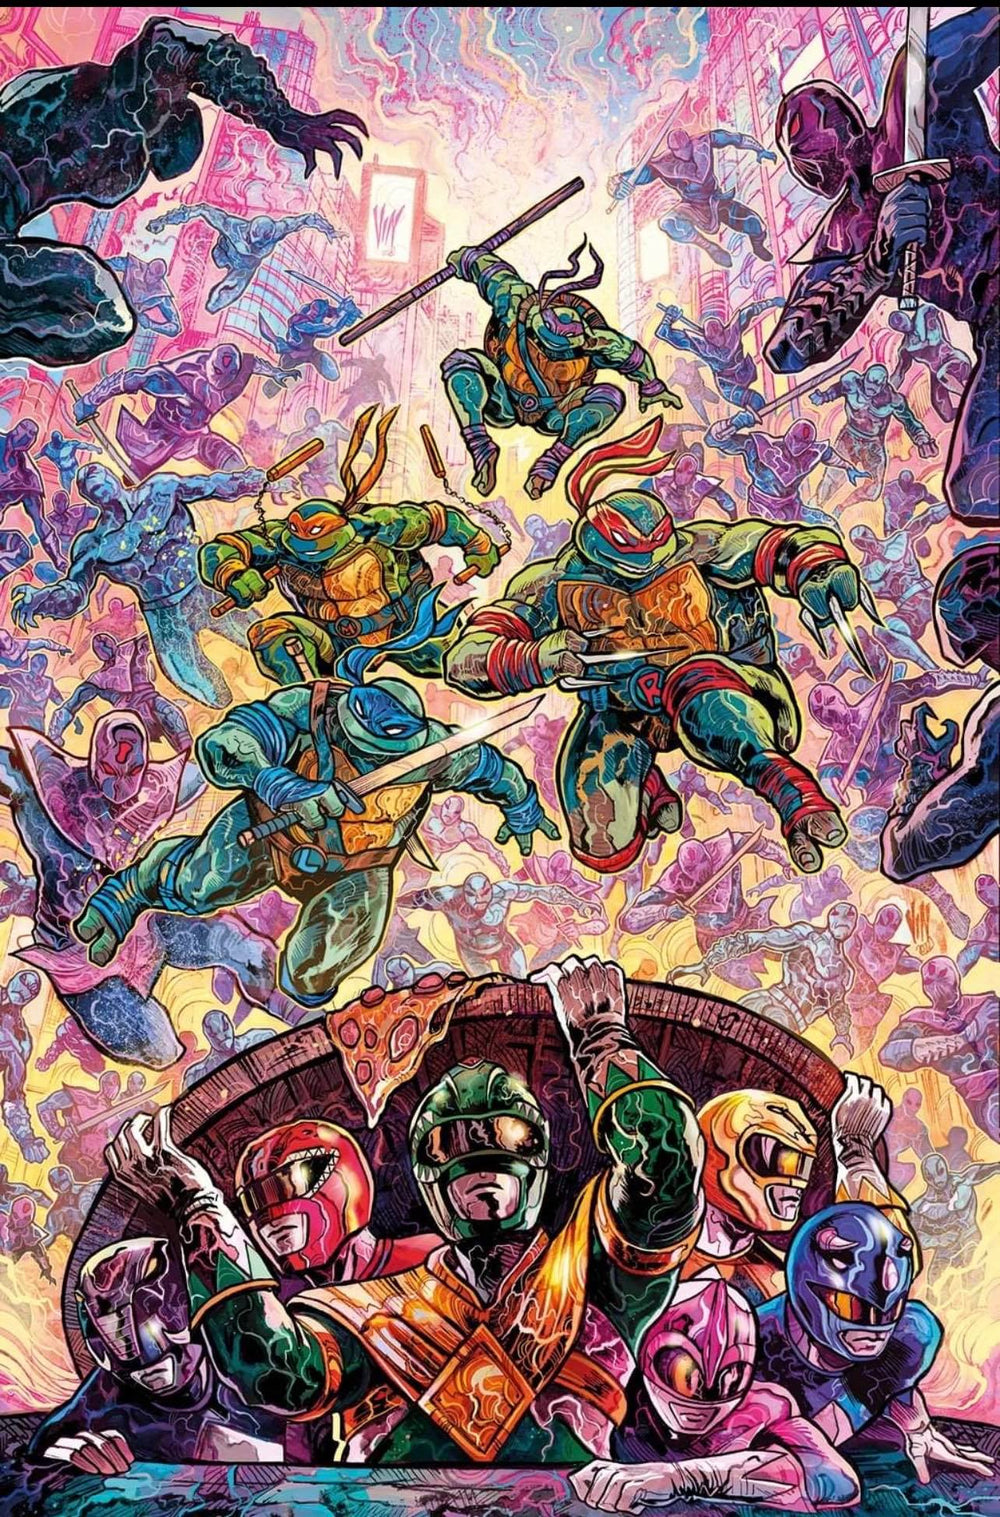 MMPR/TMNT #1 Riccardi Exclusive! (Ltd to 250 Copies with COA)